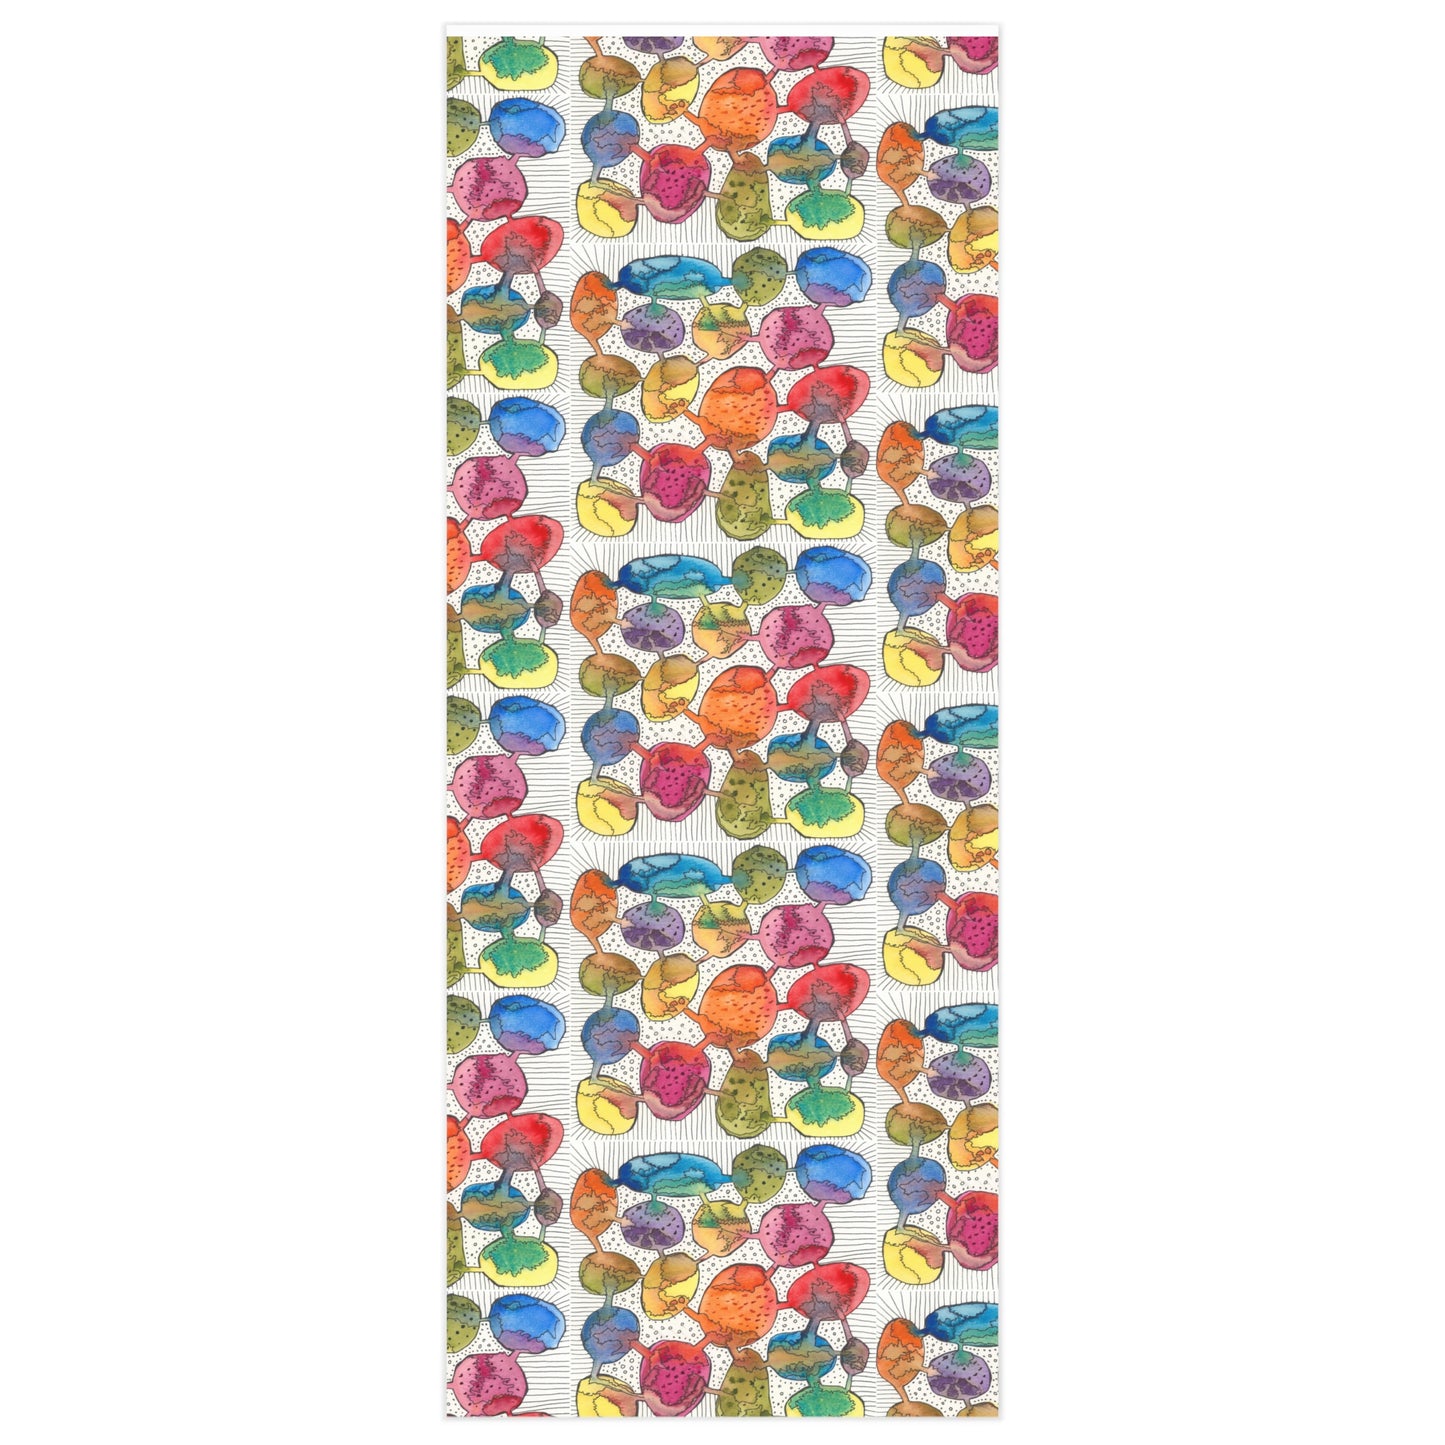 Wrapping Paper - Rainbow Bliss Bubbles